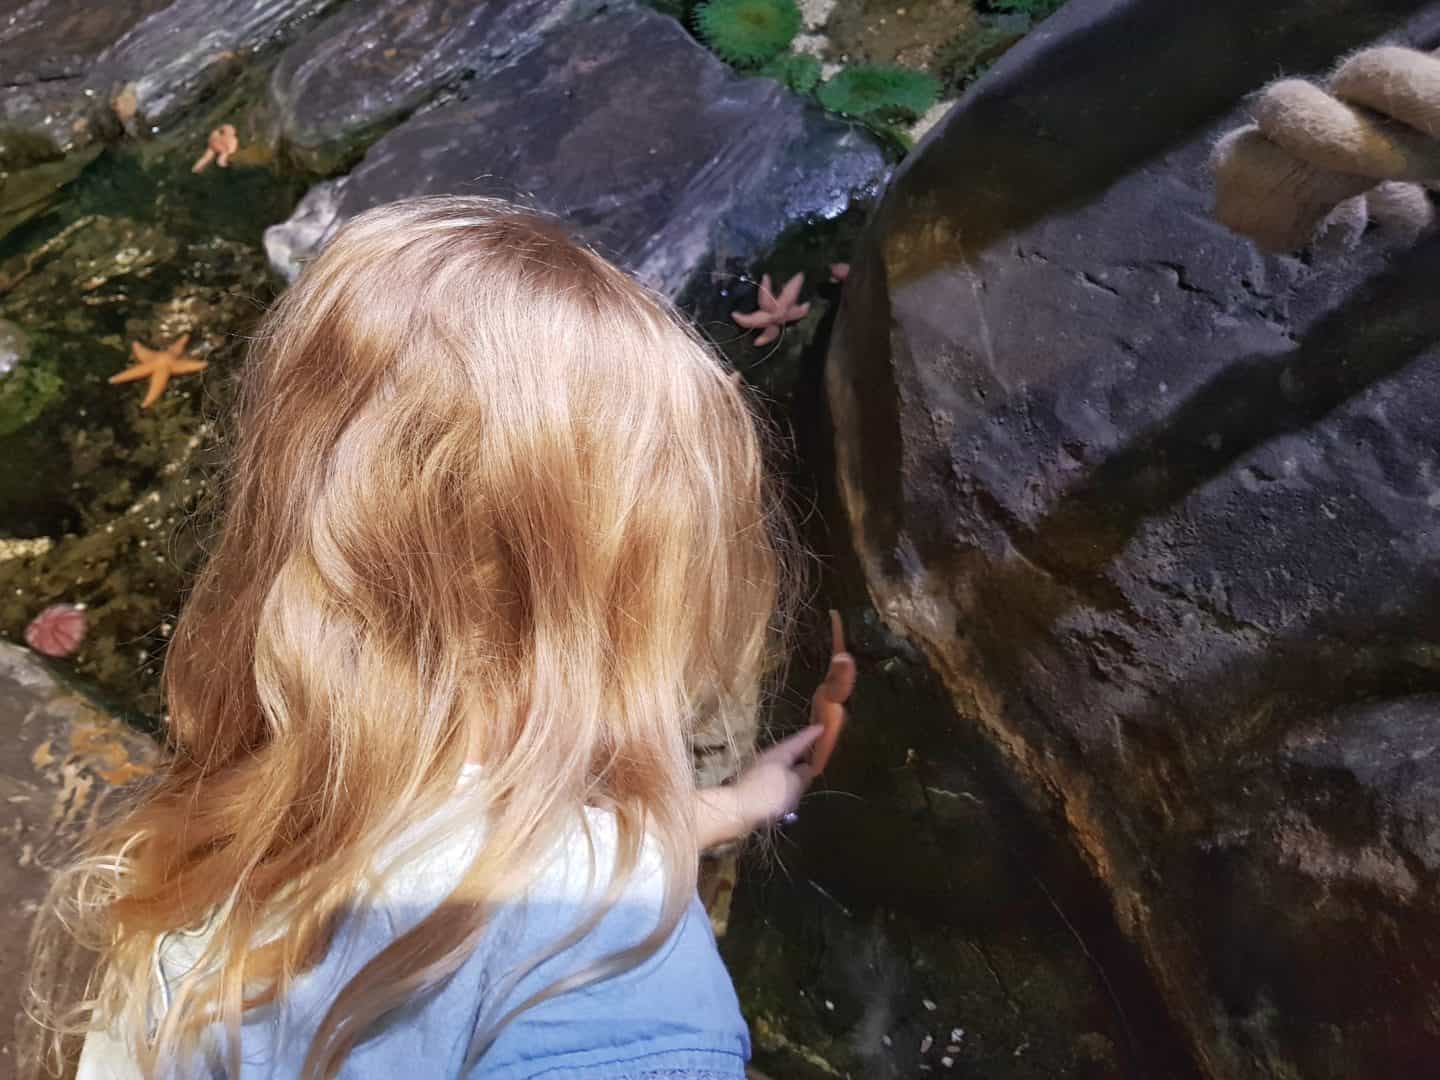 Child touching a starfish at the National Sea Life Centre